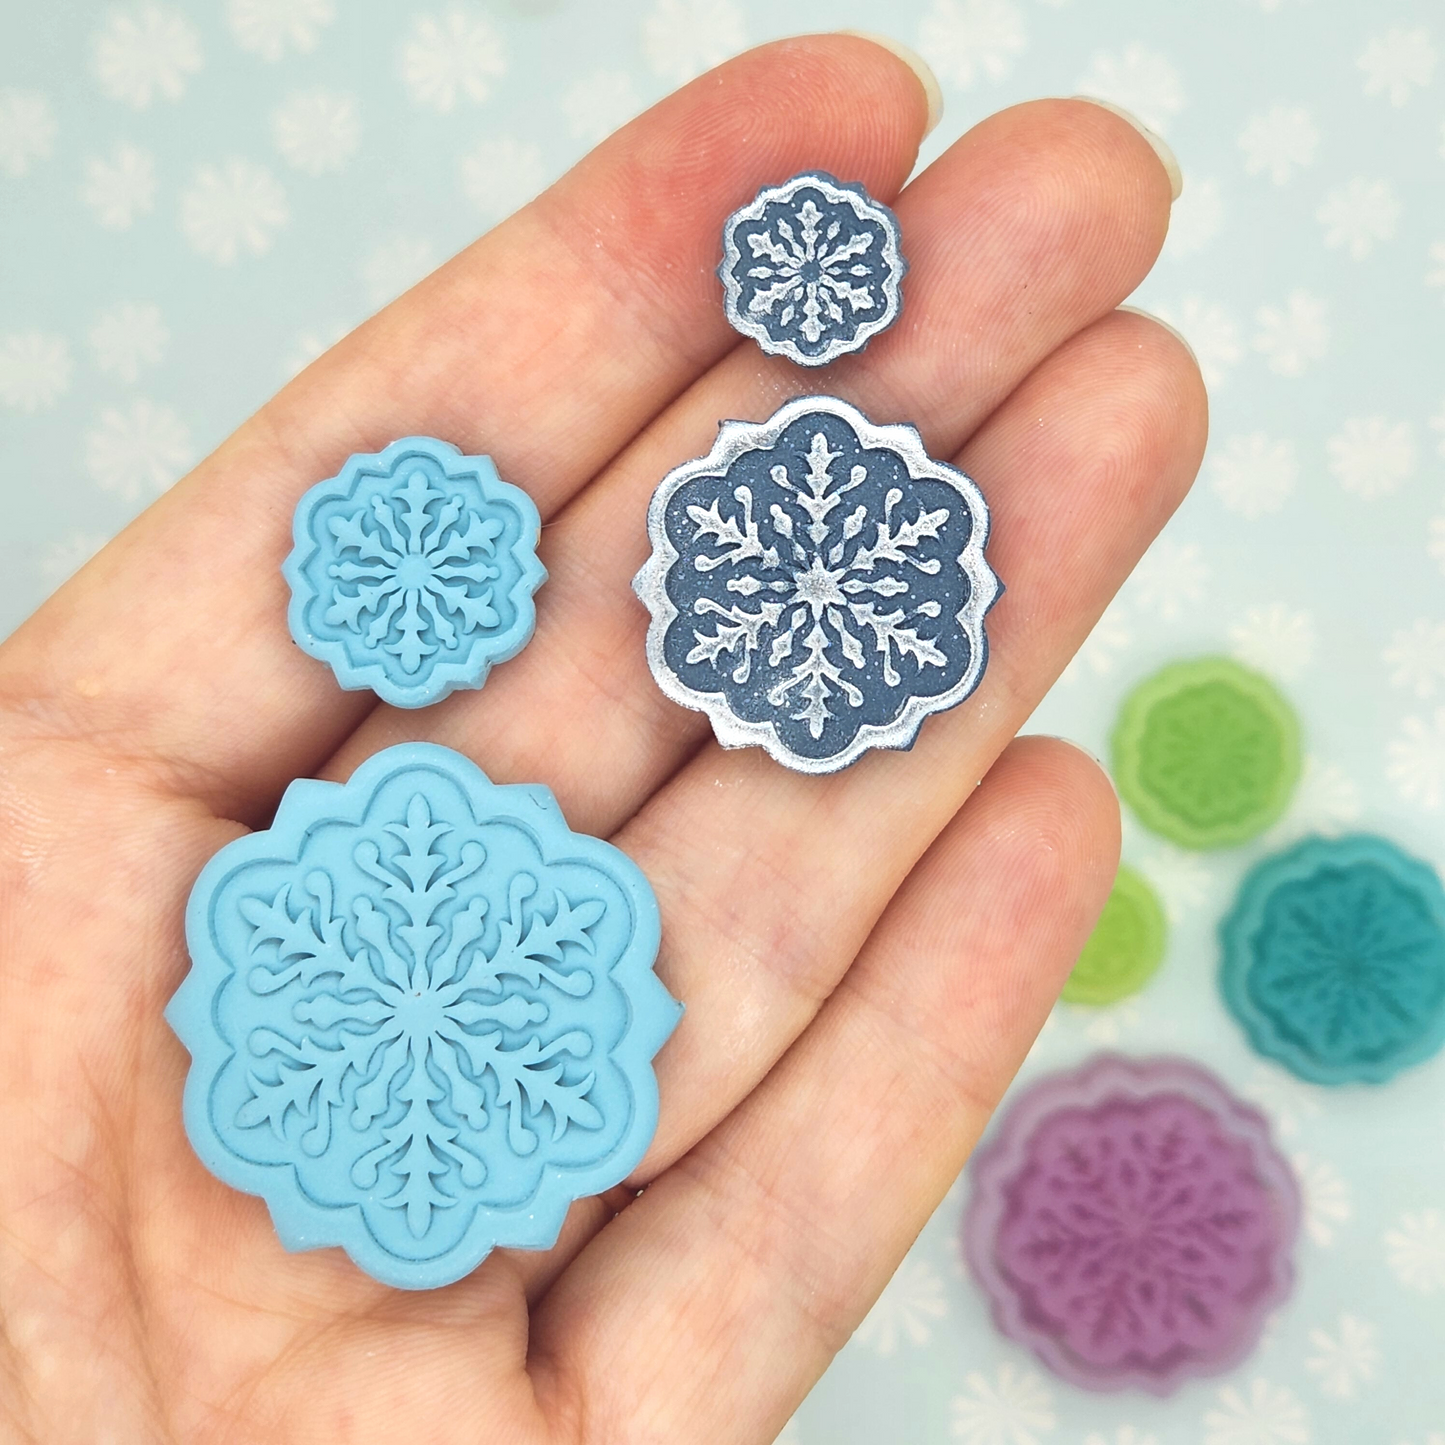 Winter Christmas Fancy Elegant Beautiful Snowflake Tile Polymer Clay Earring Jewelry Charm Pendant and Ornament Crafts